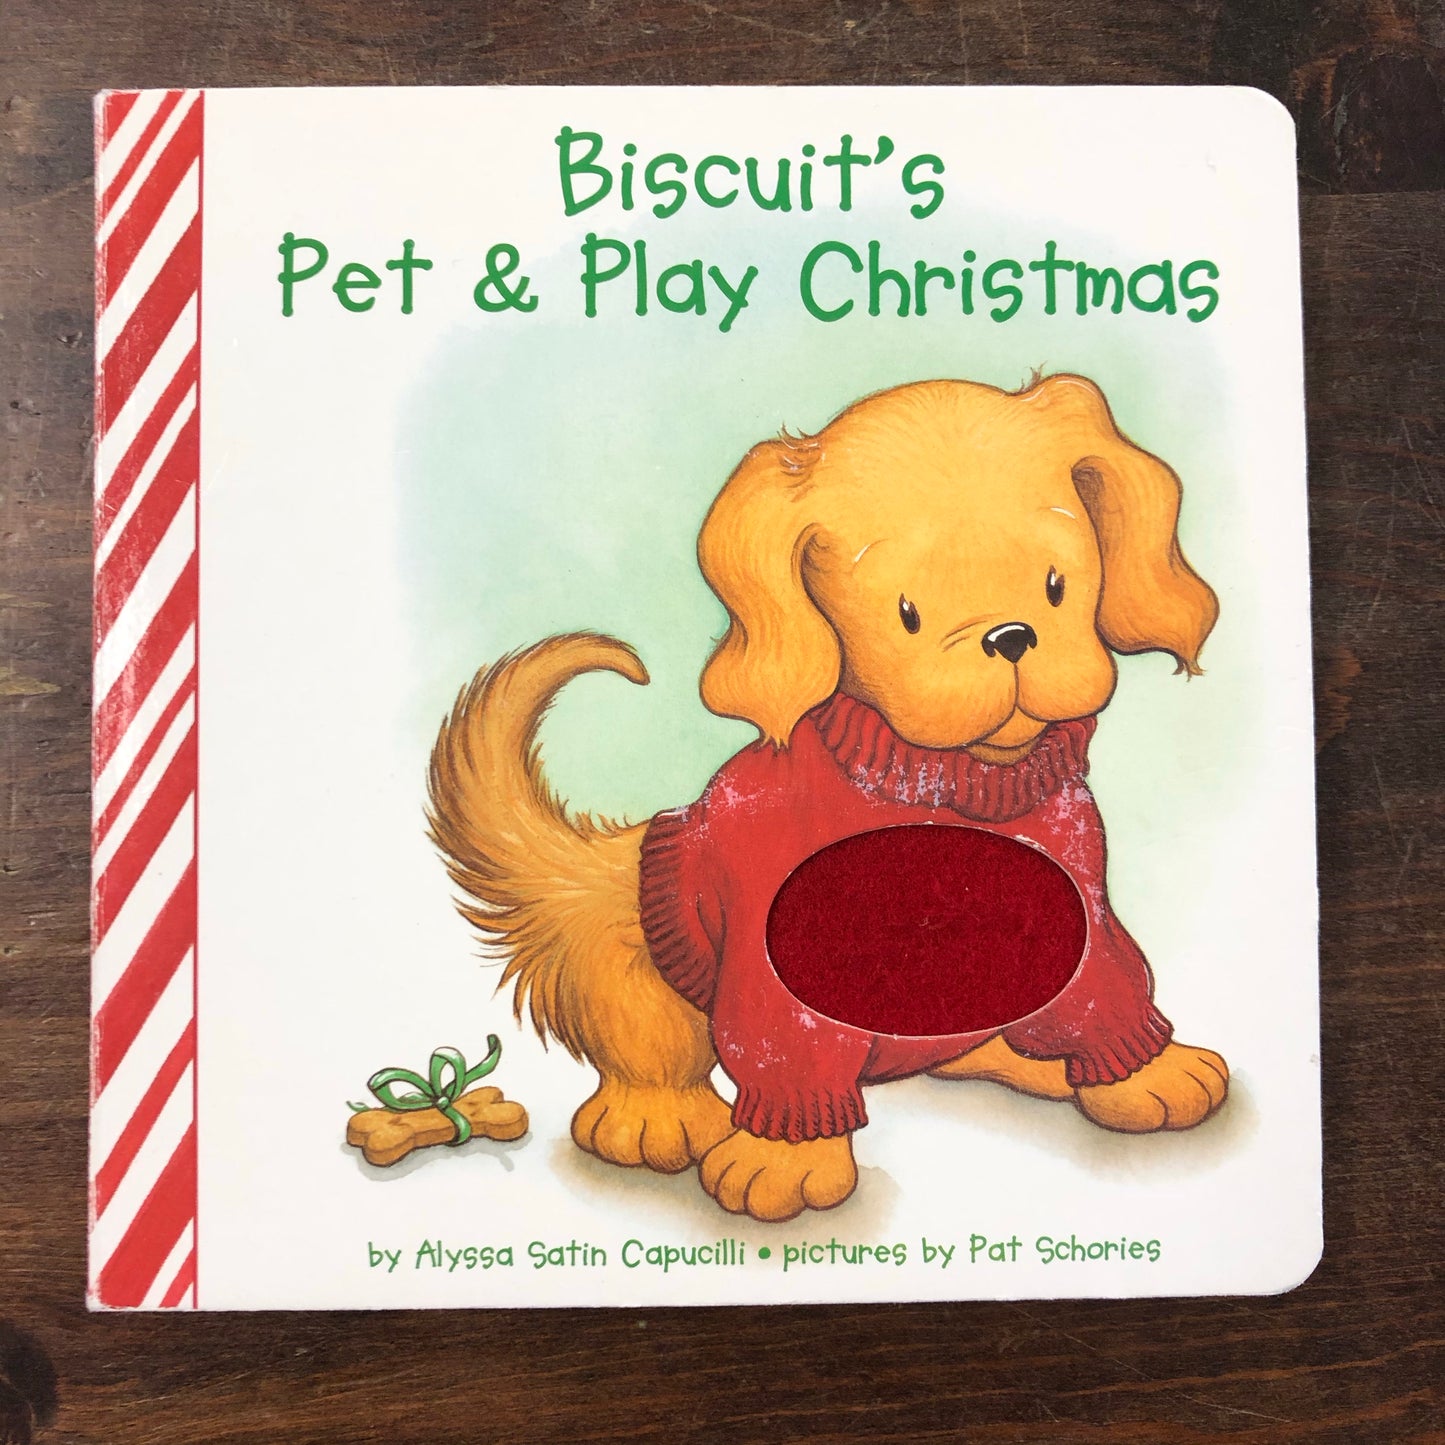 Biscuts Pet & Play Christmas